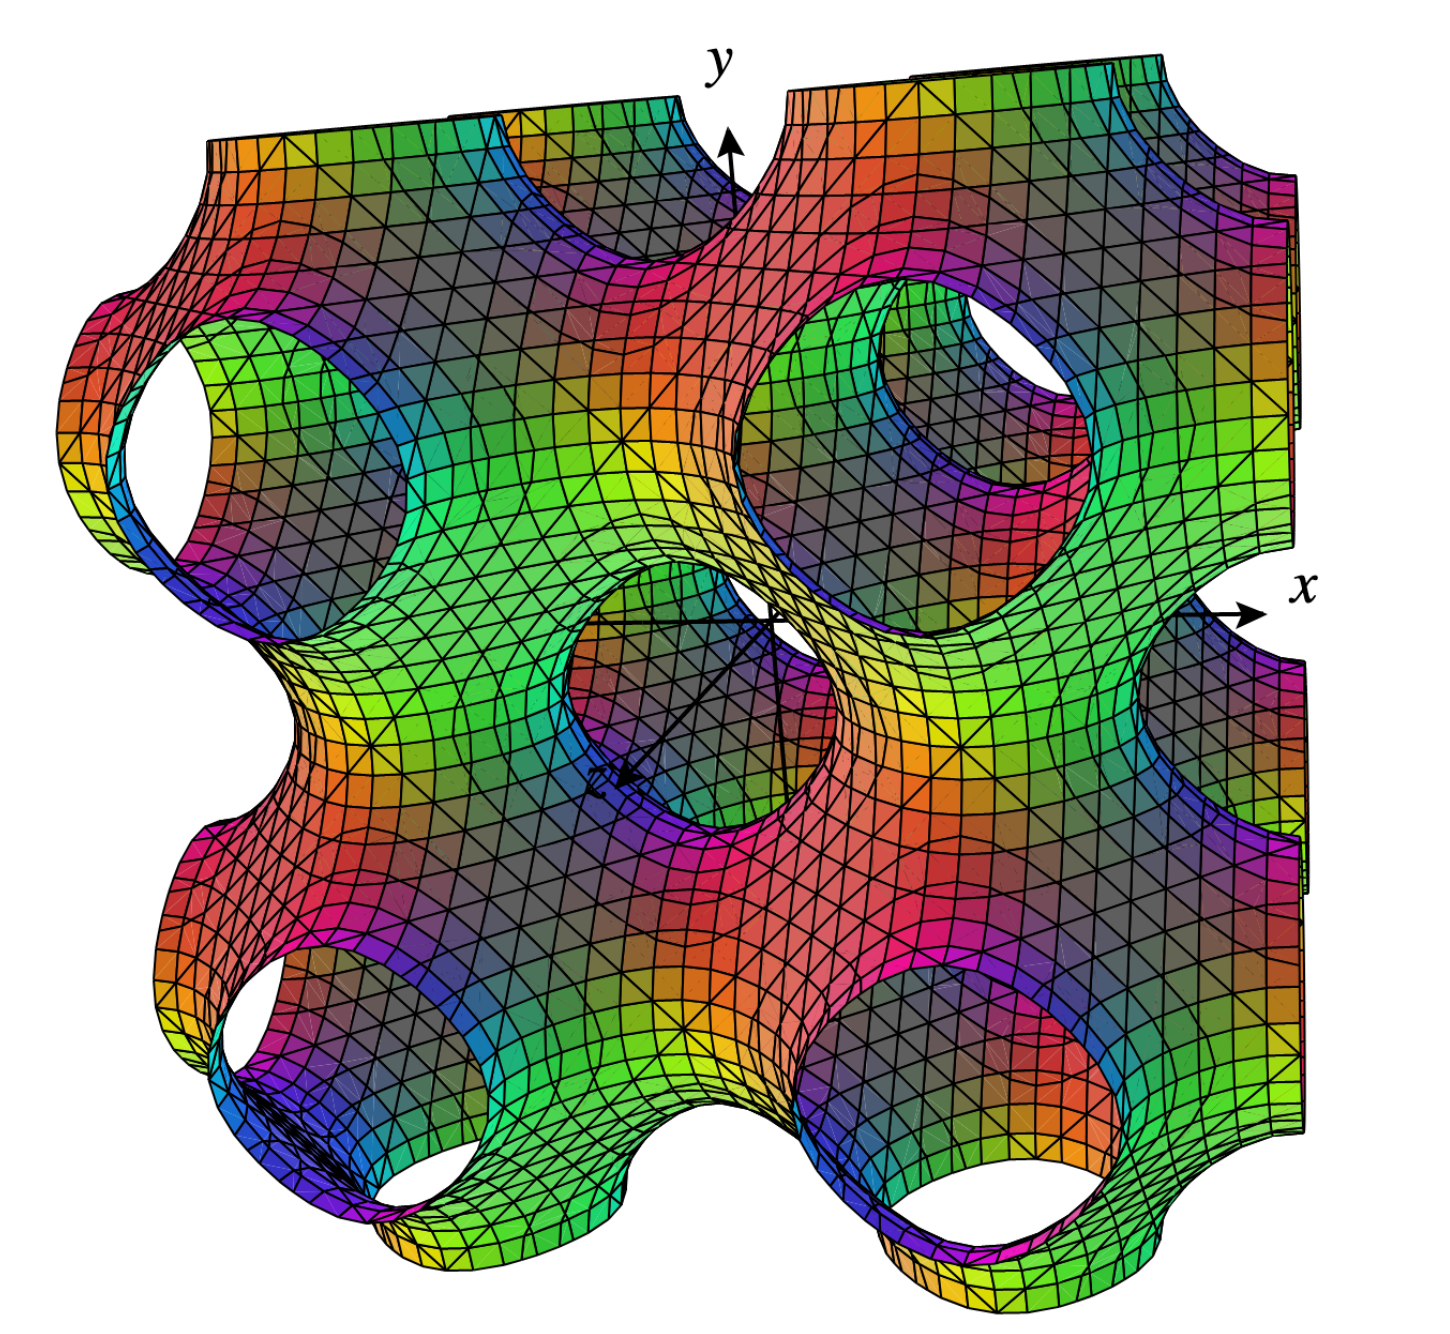 Fig. 1: Graphical representation of a cubosome. The coloured surface resembles the lipid-water interface with the confined water channels. The channel diameter is typically in the range of 10 nanometres, with the overall size of the cubosomes being several hundred nanometres. 